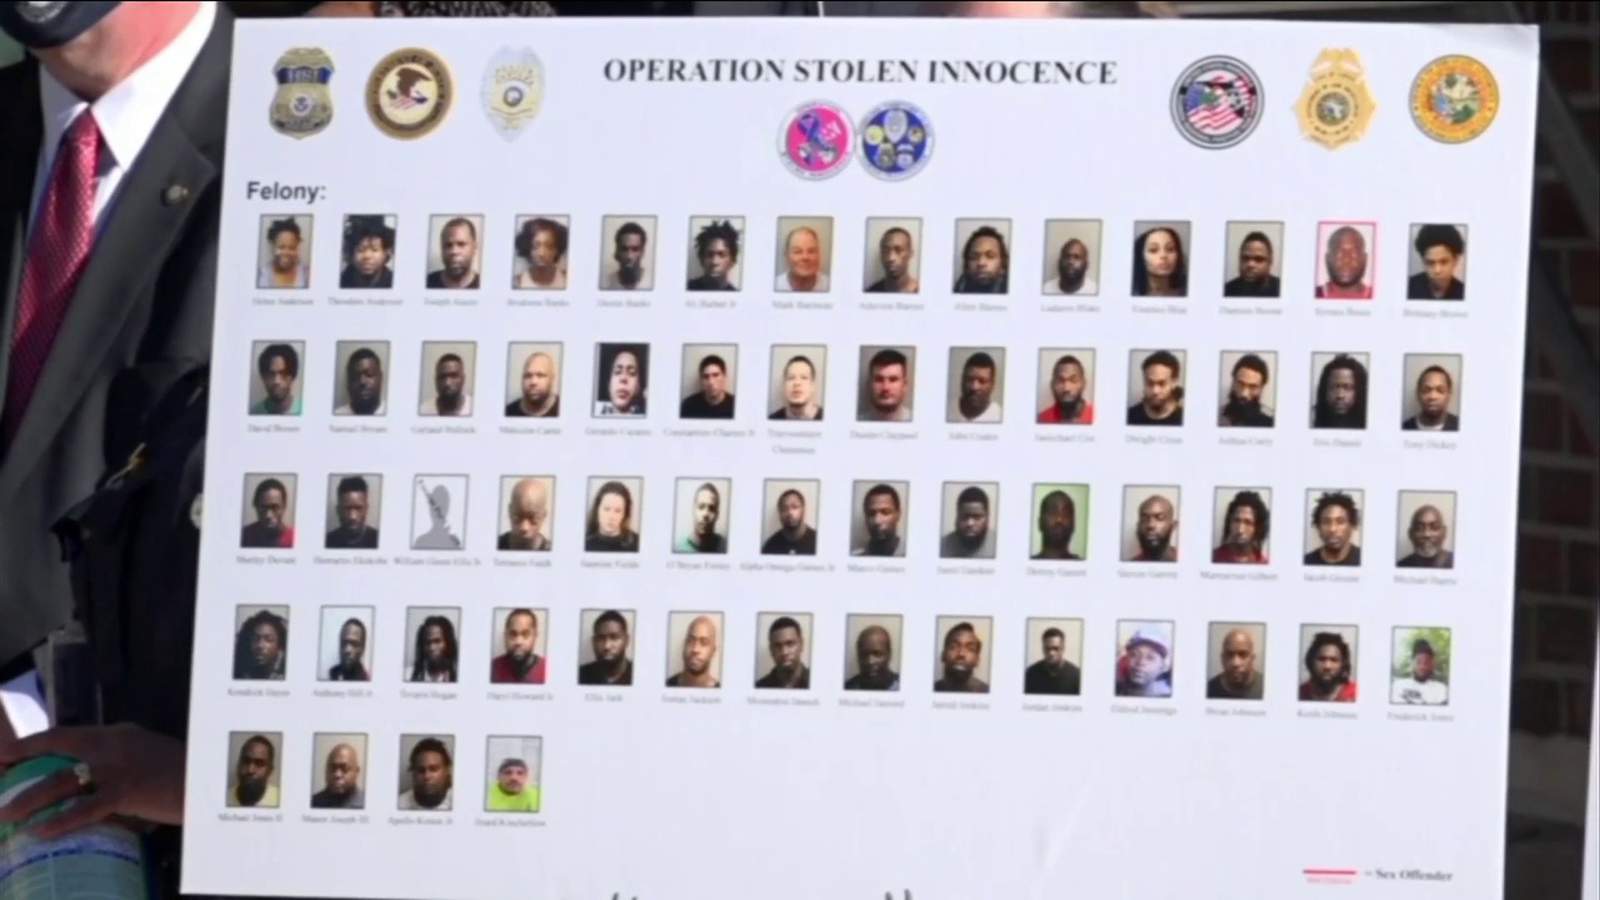 More than 170 arrested in Florida human trafficking case